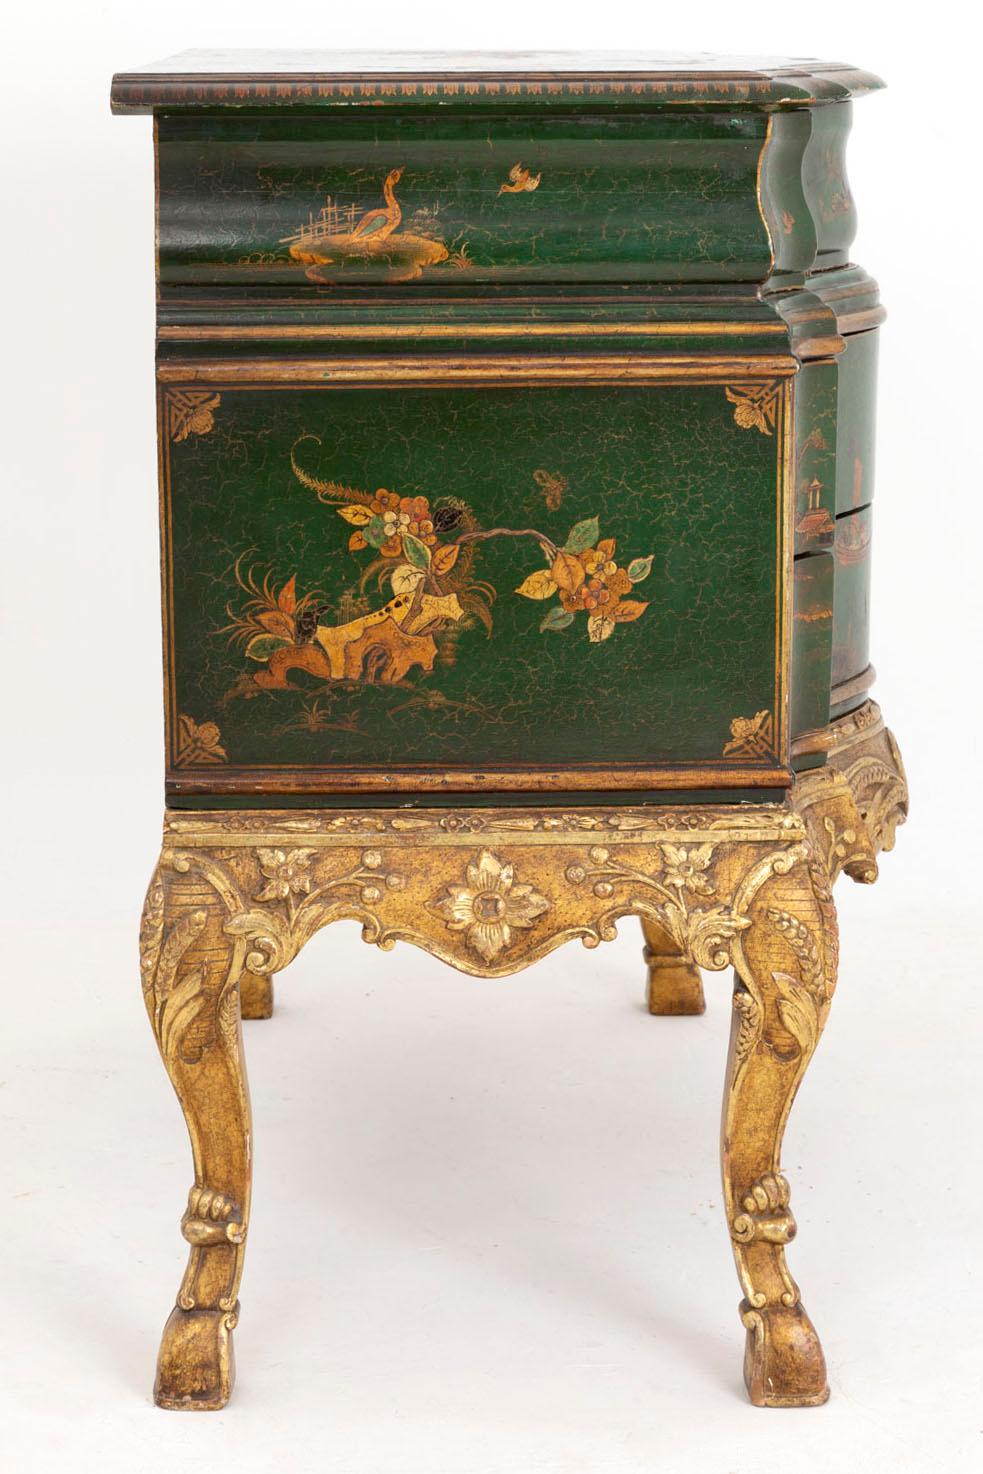 Serpentine Commode in Green Lacquered Wood, Chinese Decoration, 1950s (Rokoko)